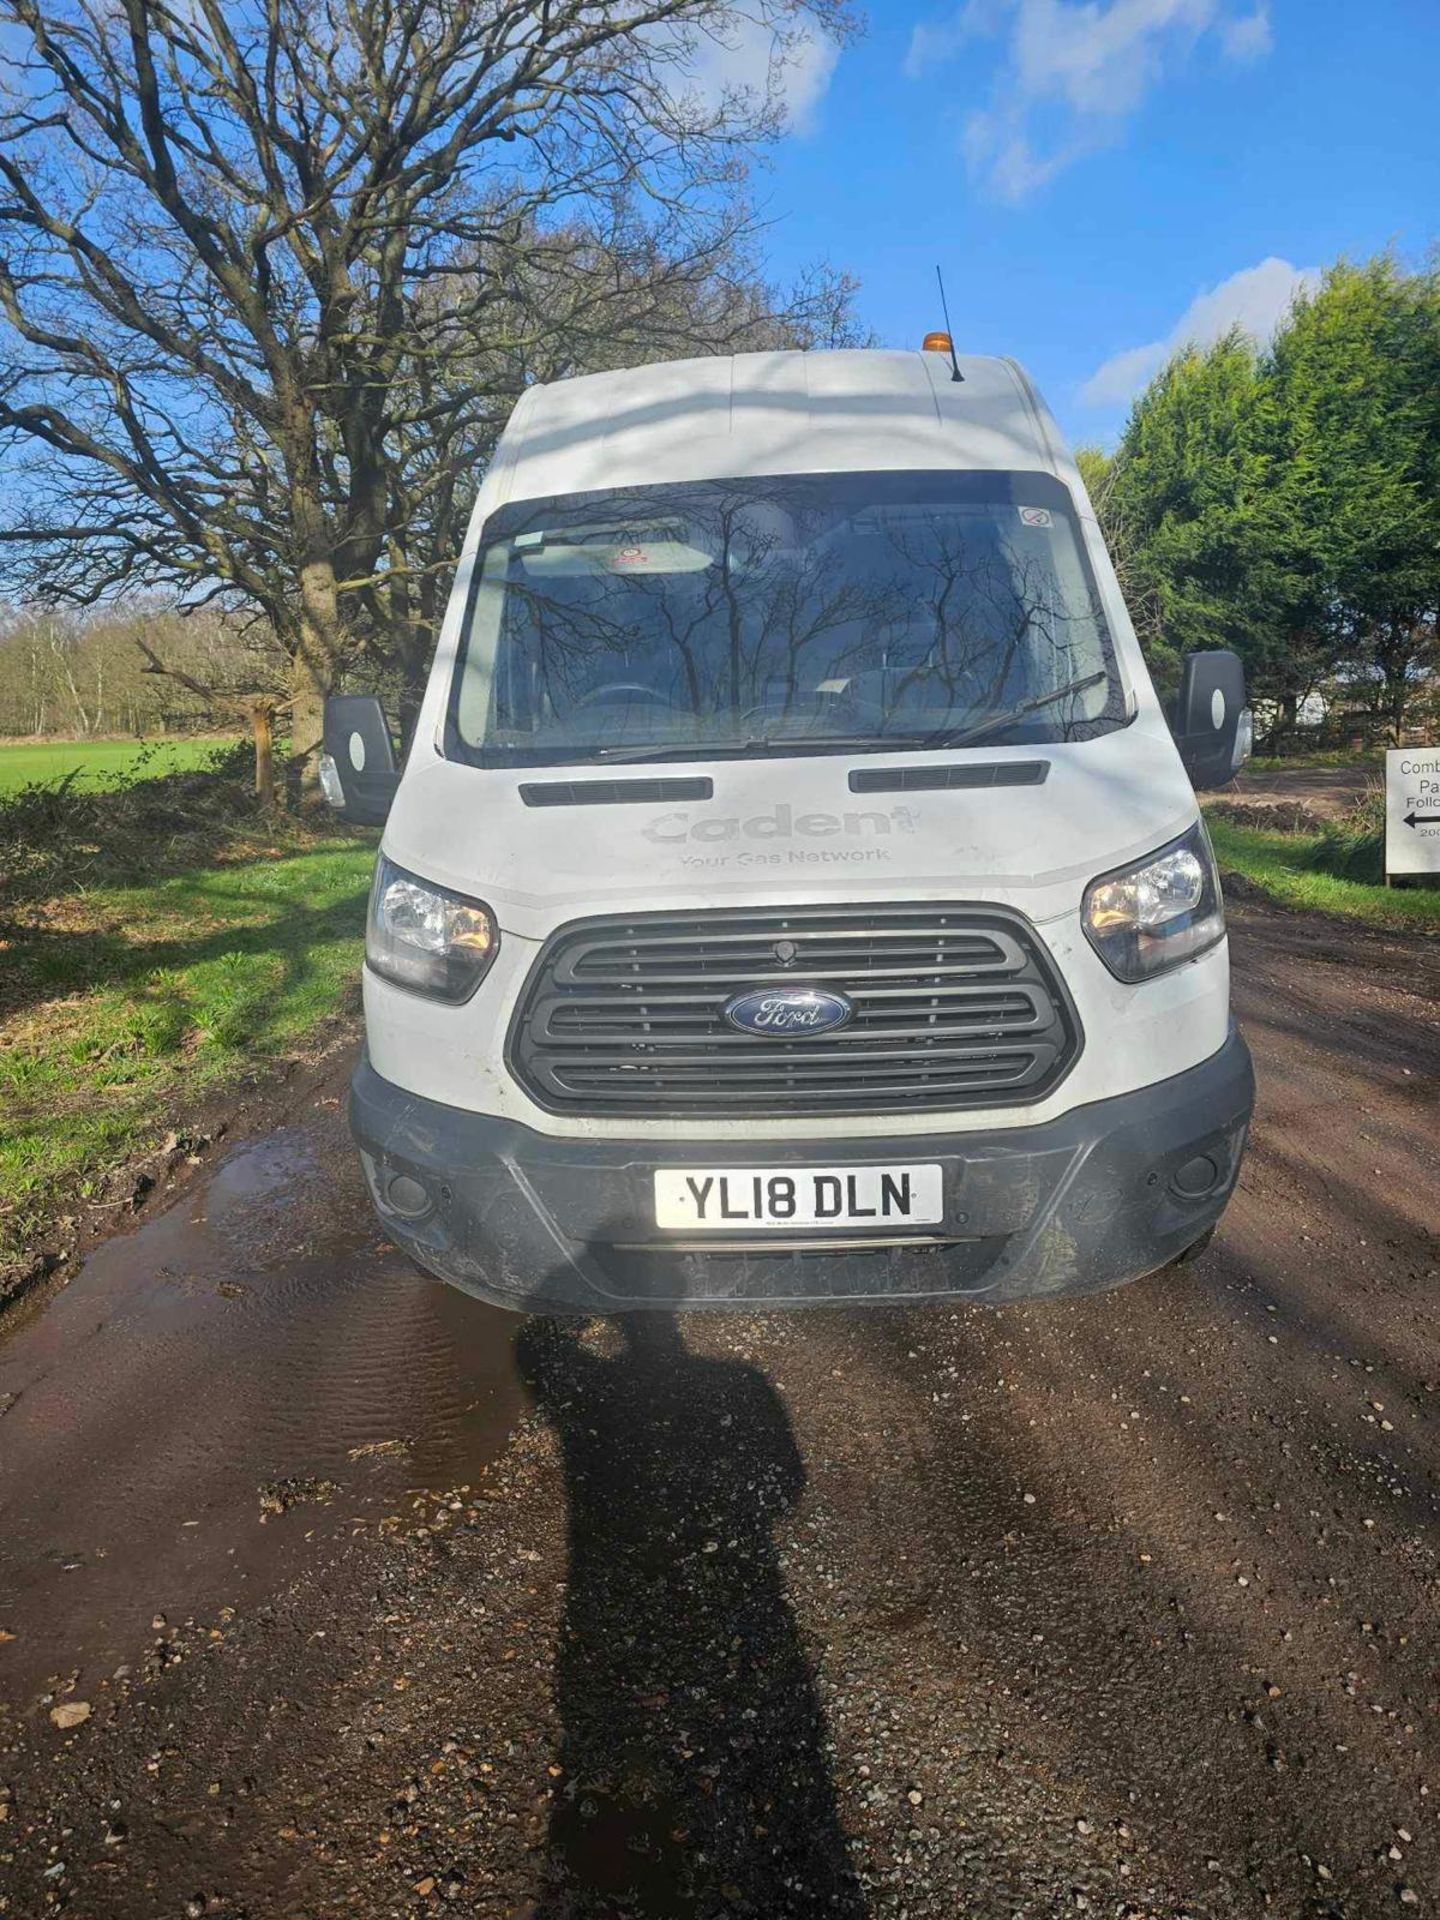 2018 18 FORD TRANSIT 350 PANEL VAN - 114K MILES - L2 H3 FWD - AIR CON - IDEAL CAMPER CONVERSION  - Image 9 of 9